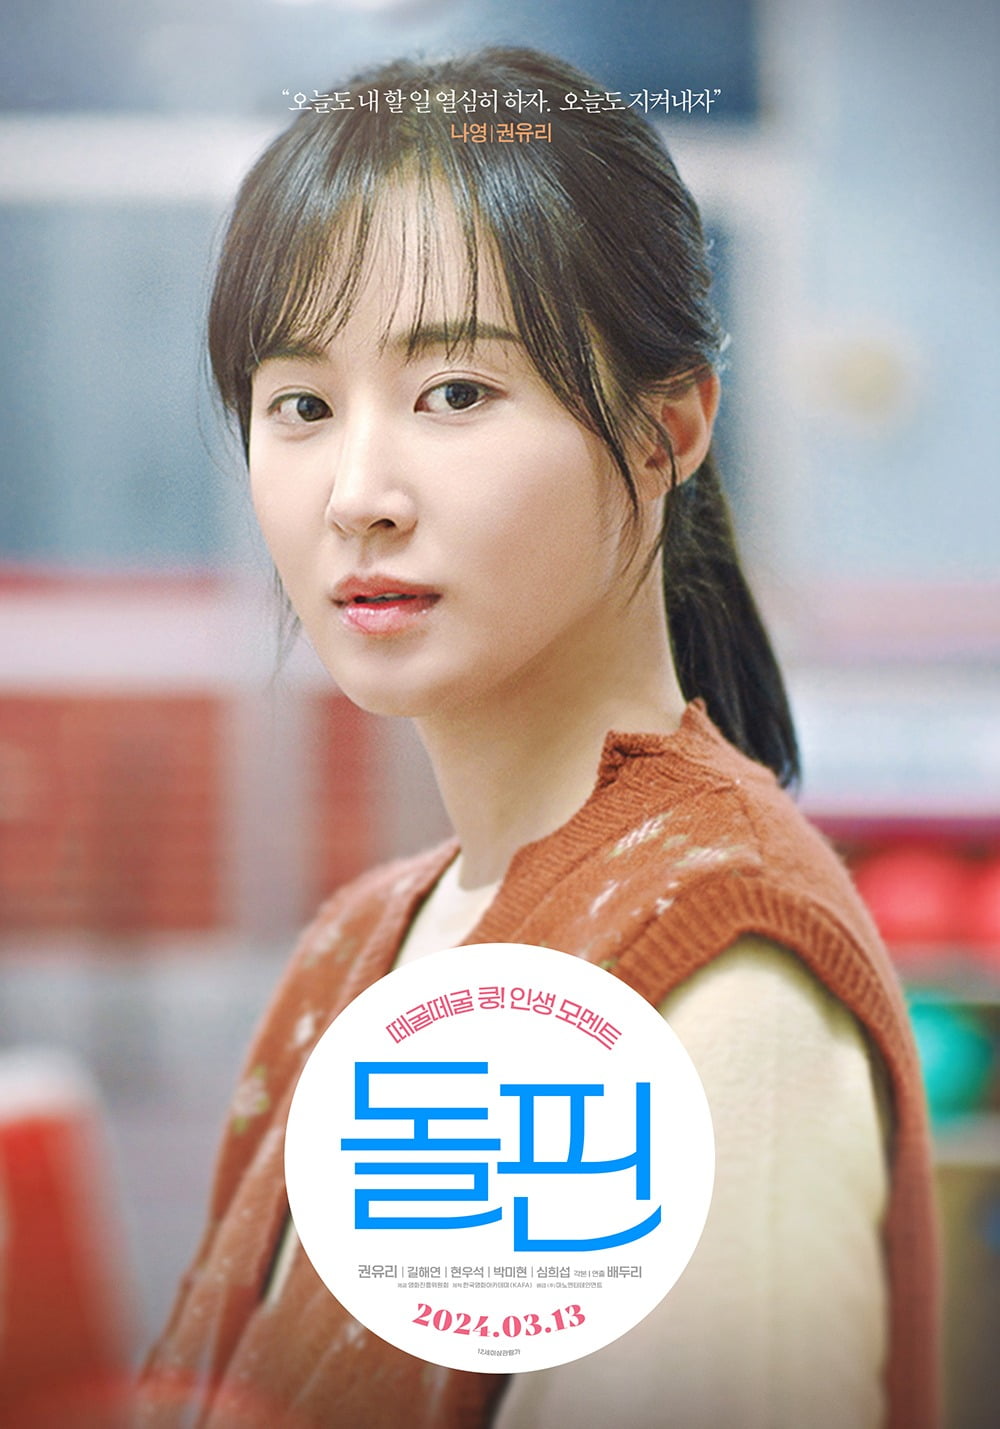 Kwon Yuri's first solo starring film 'Dolphin' was released